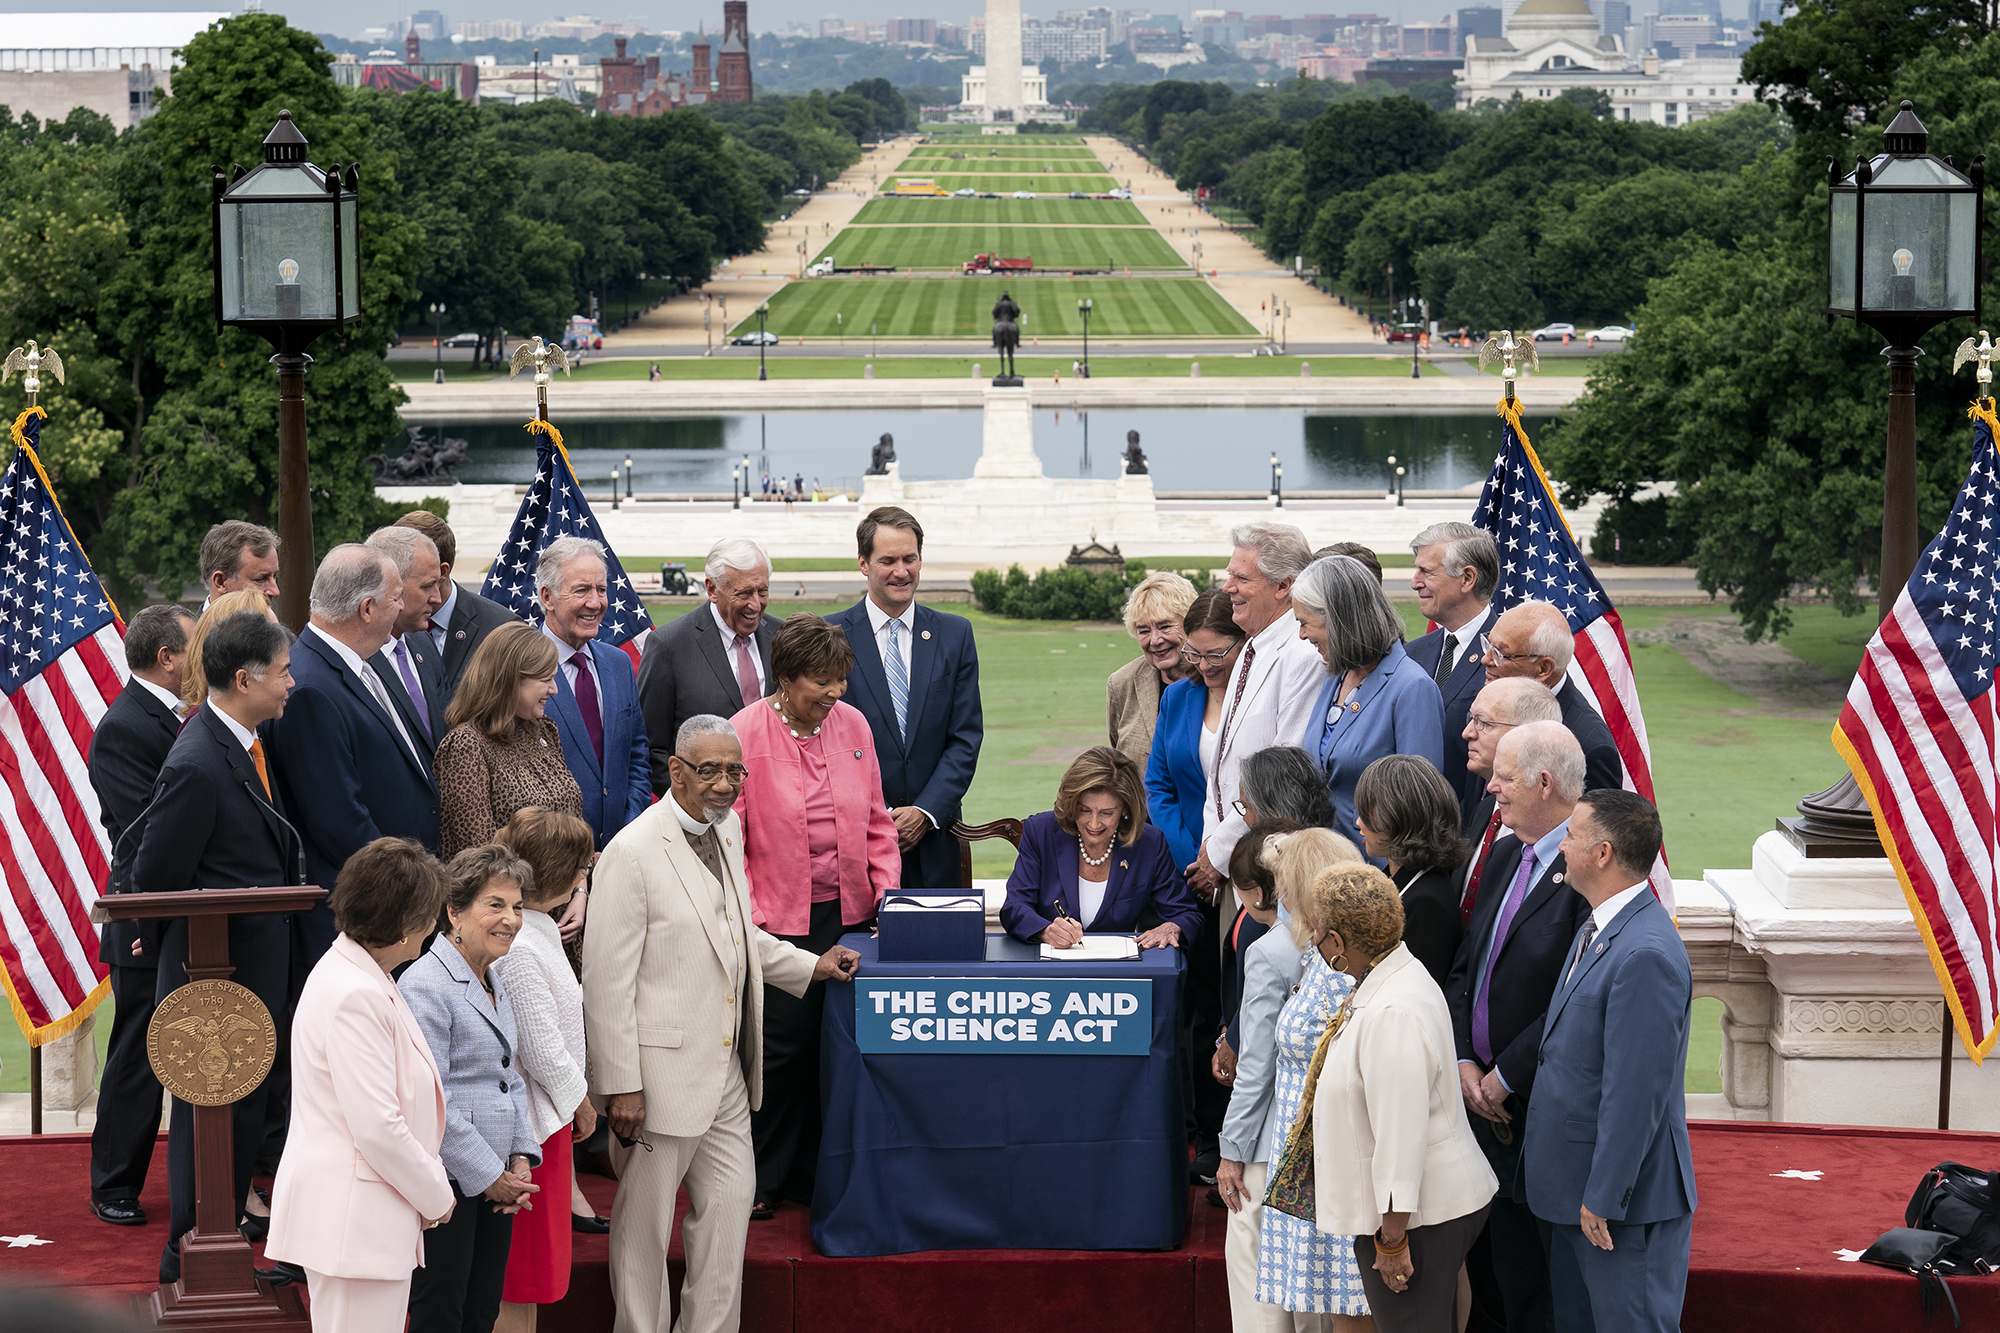 Group of people at a signing huddled around a table labeled 'The CHIPS and Science Act'